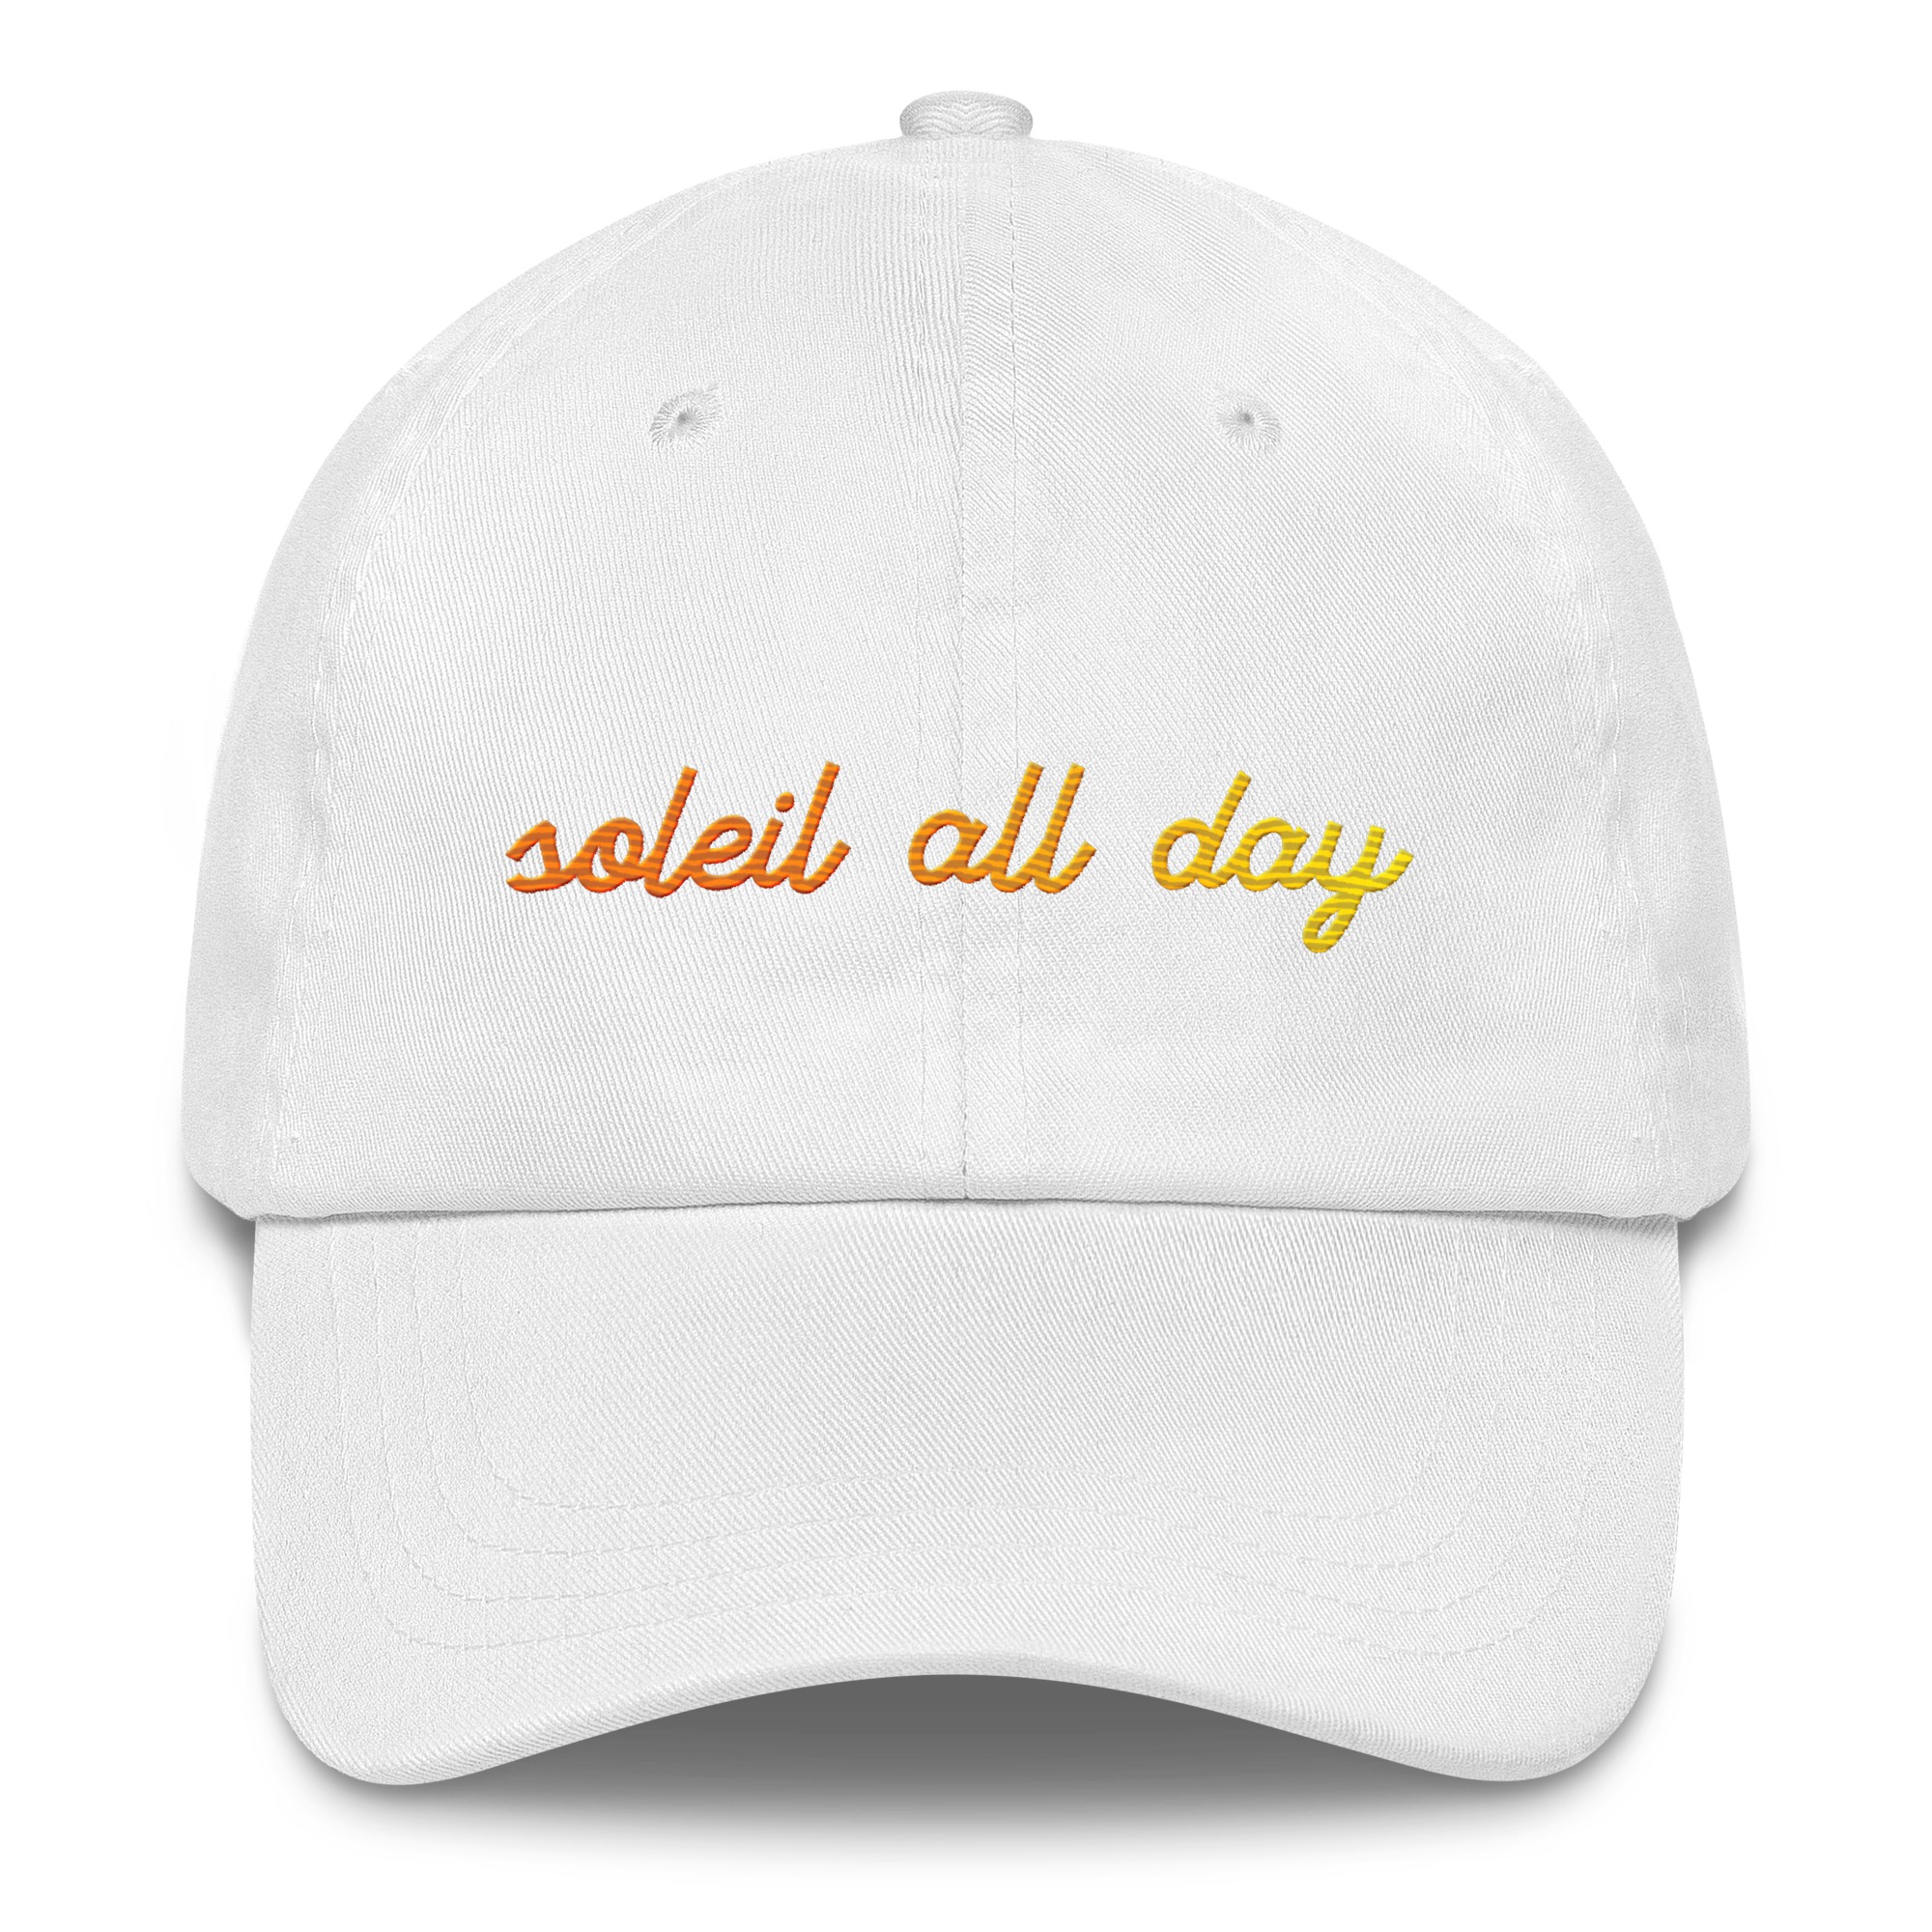 classic-dad-hat-white-front-6671b5862e416.png